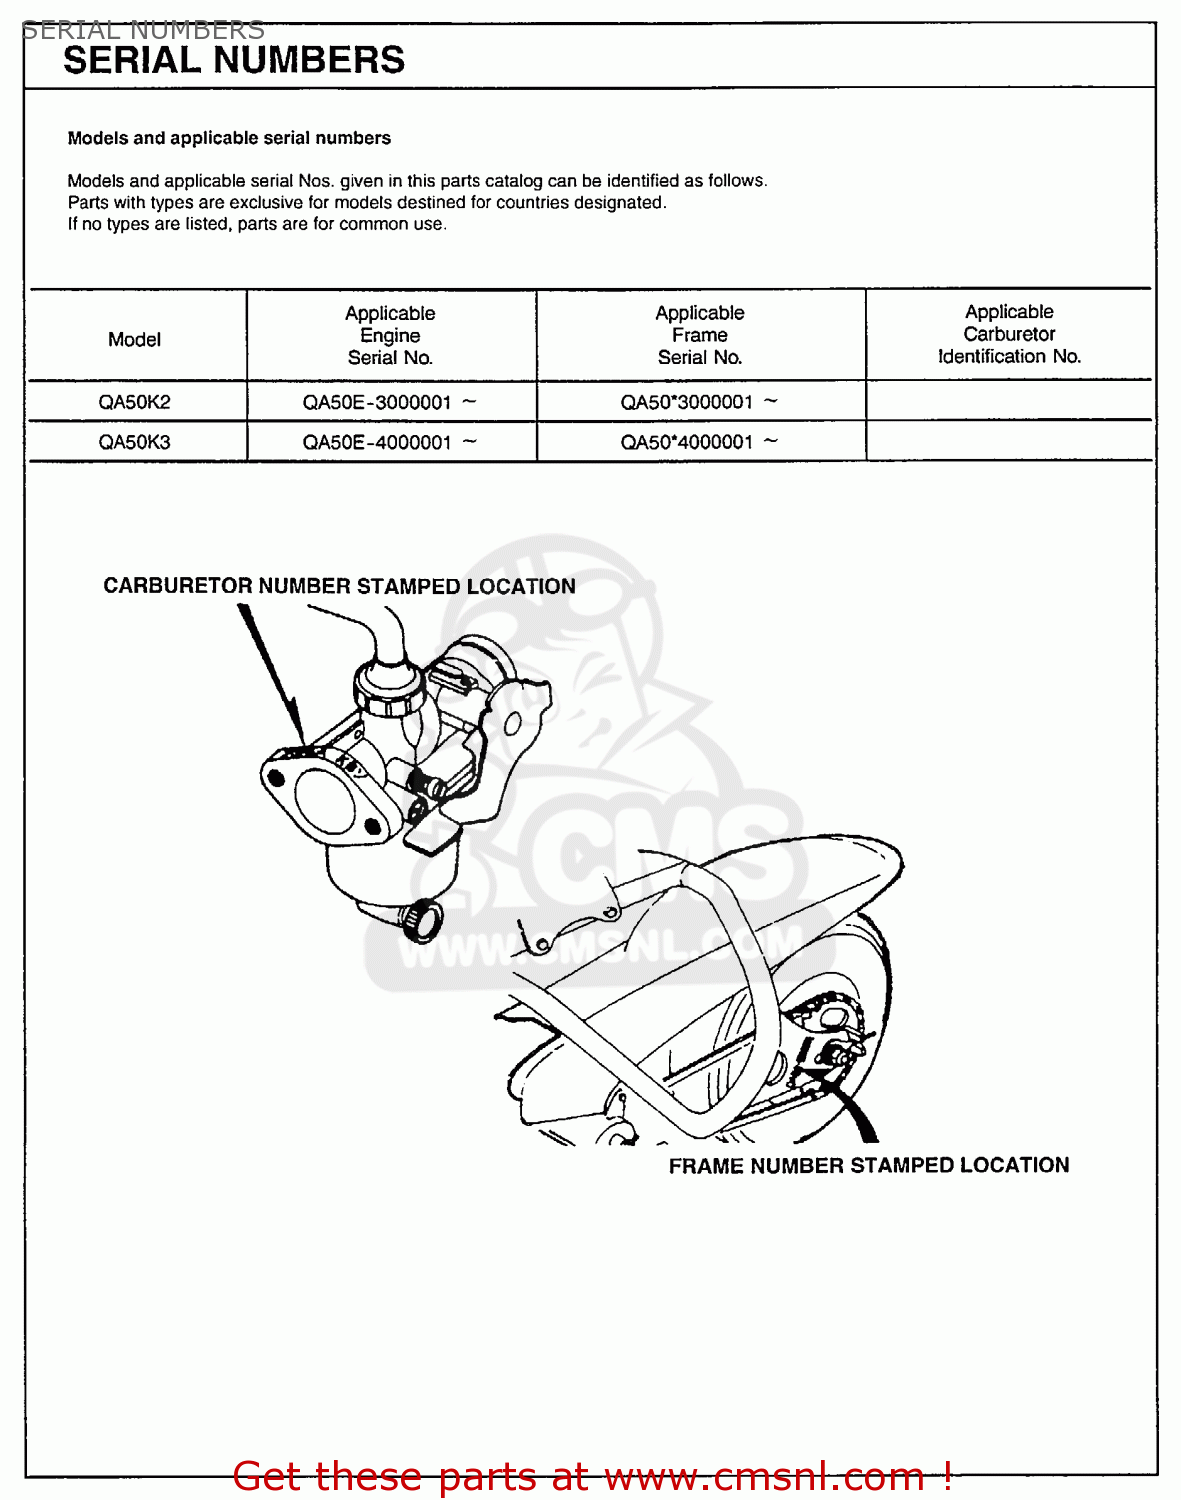 How to determine honda motorcycle year from model number #1